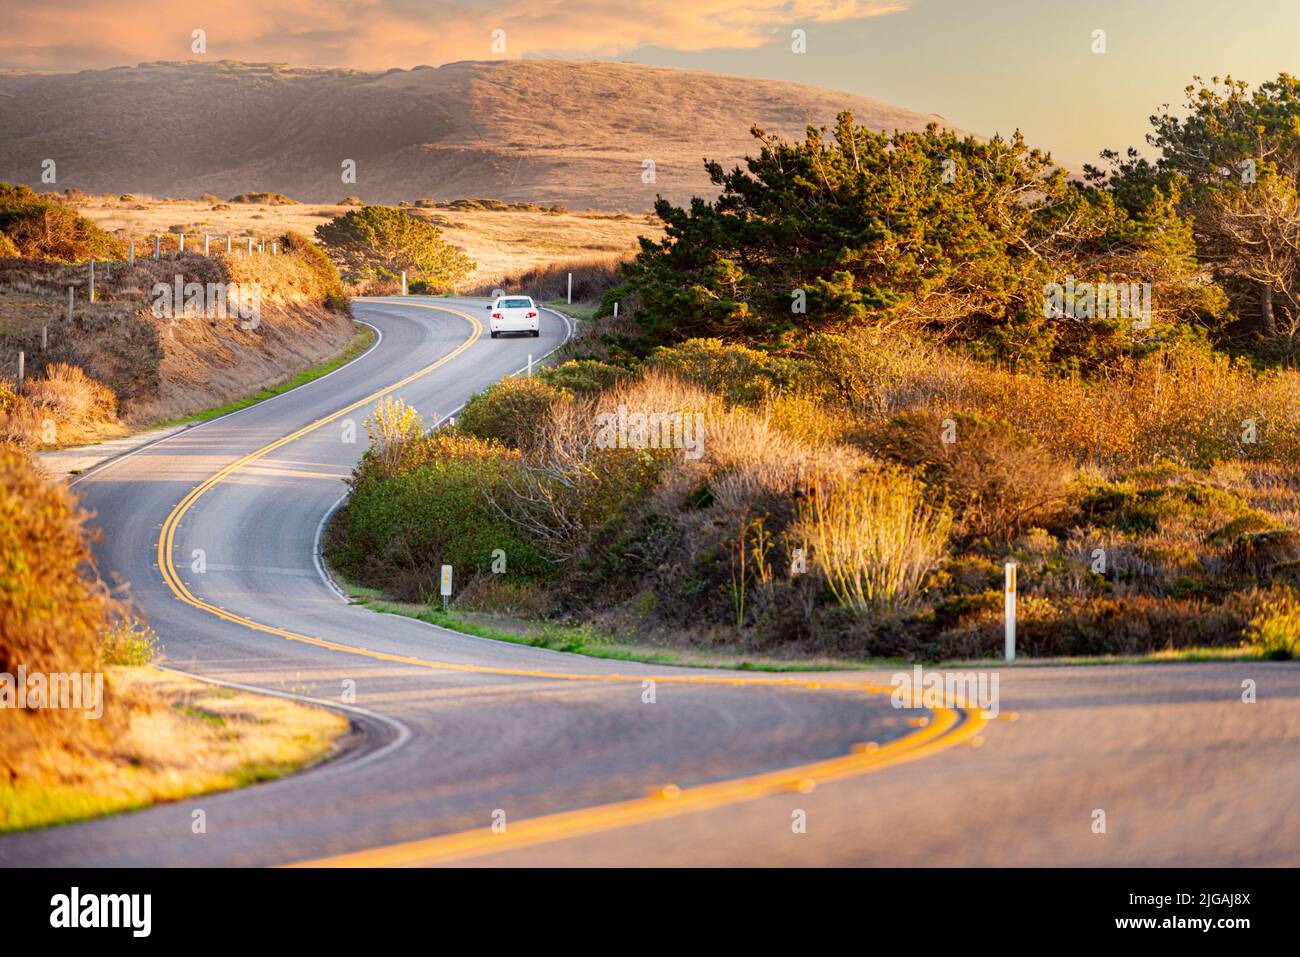 Car at highway, Big sur coast in California, United States of America. Mountains in background. Stock Photo